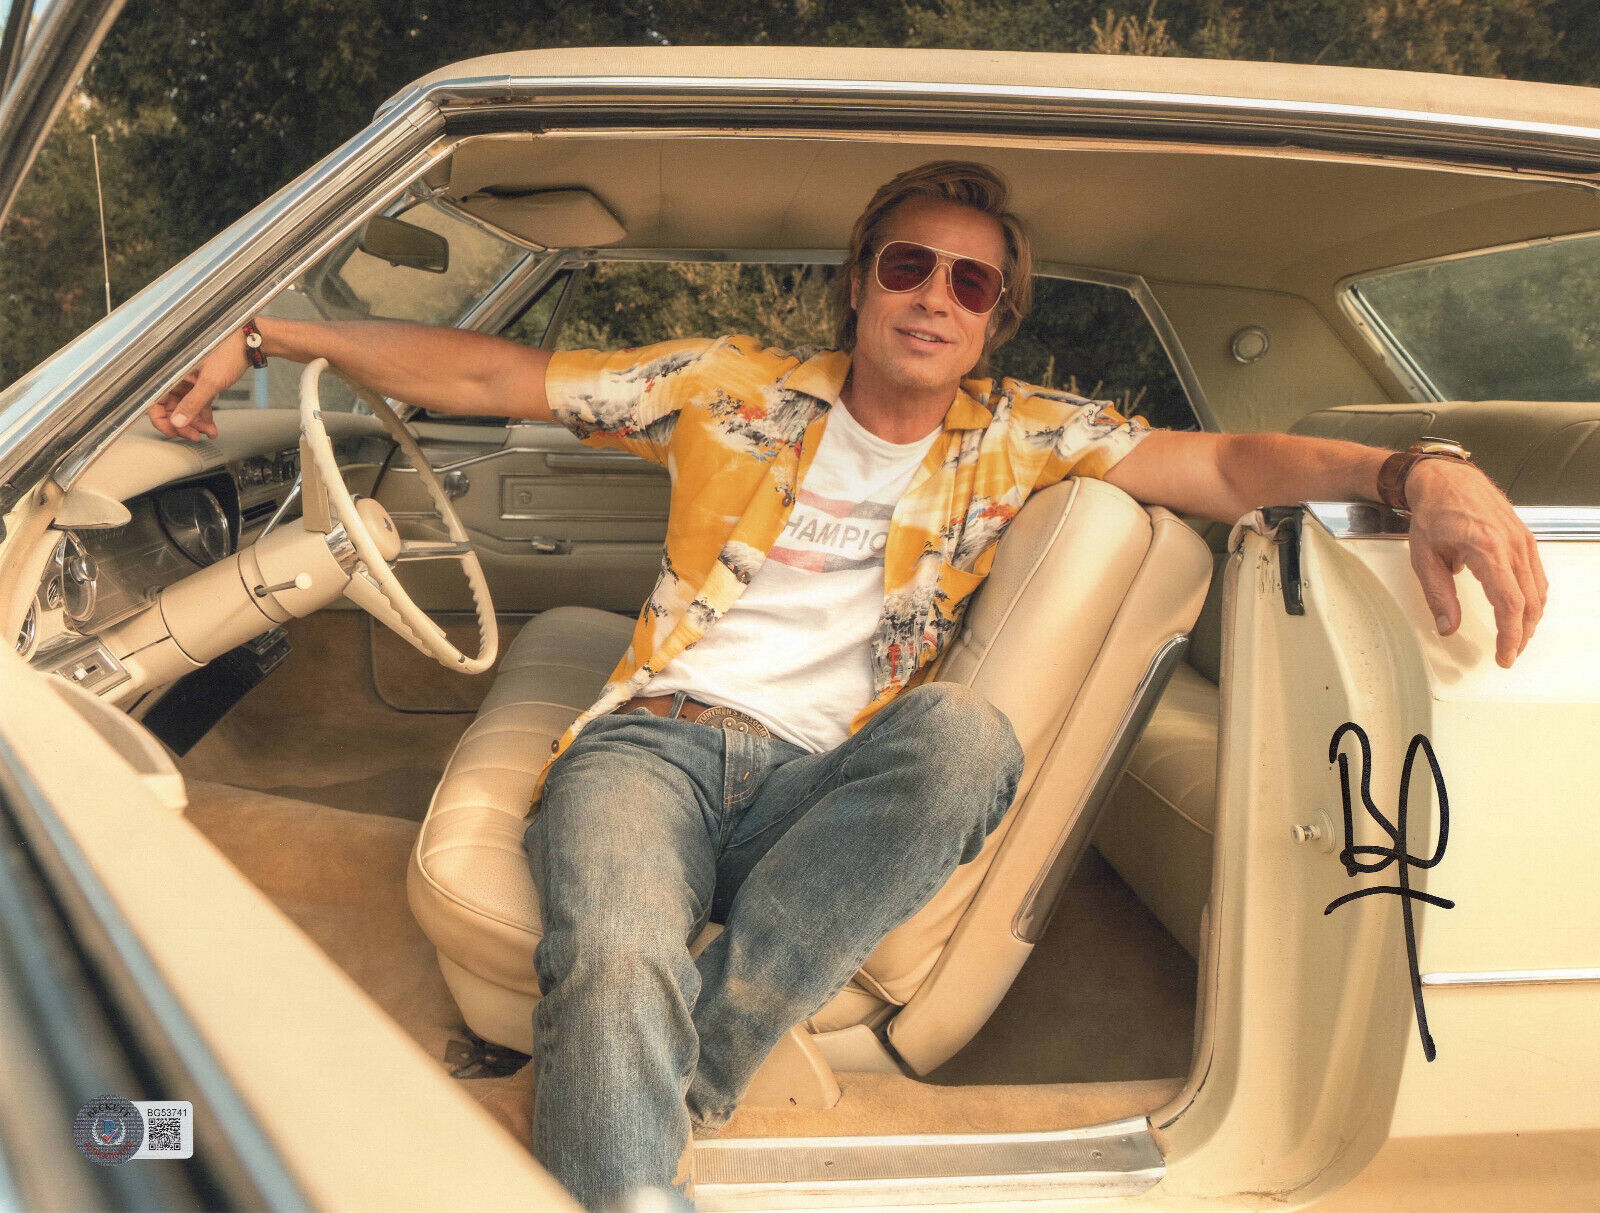 BRAD PITT SIGNED AUTOGRAPH 11X14 PHOTO ONCE UPON A TIME IN HOLLYWOOD BAS BECKETT